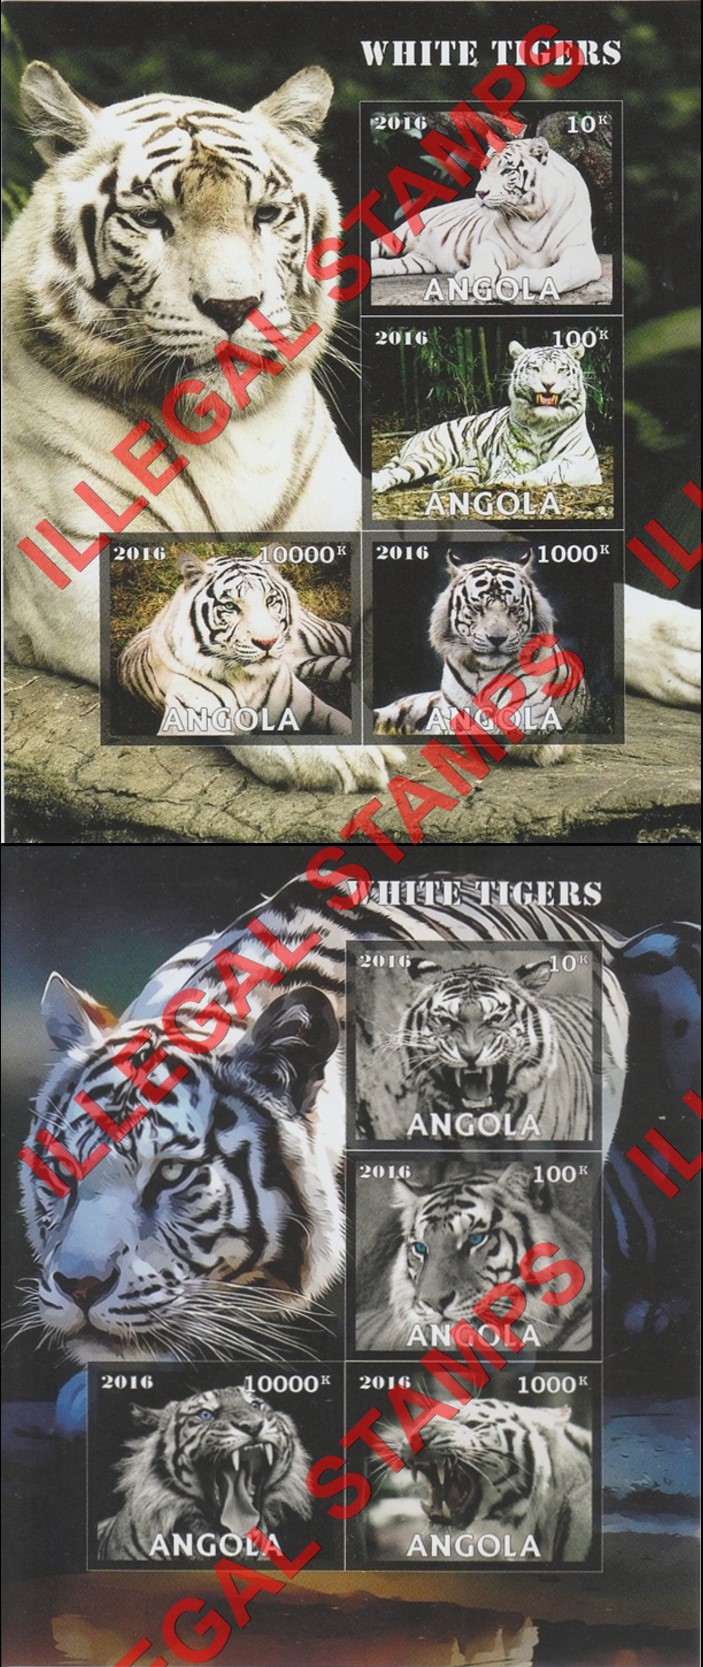 Angola 2016 White Tigers Illegal Stamp Souvenir Sheets of 4